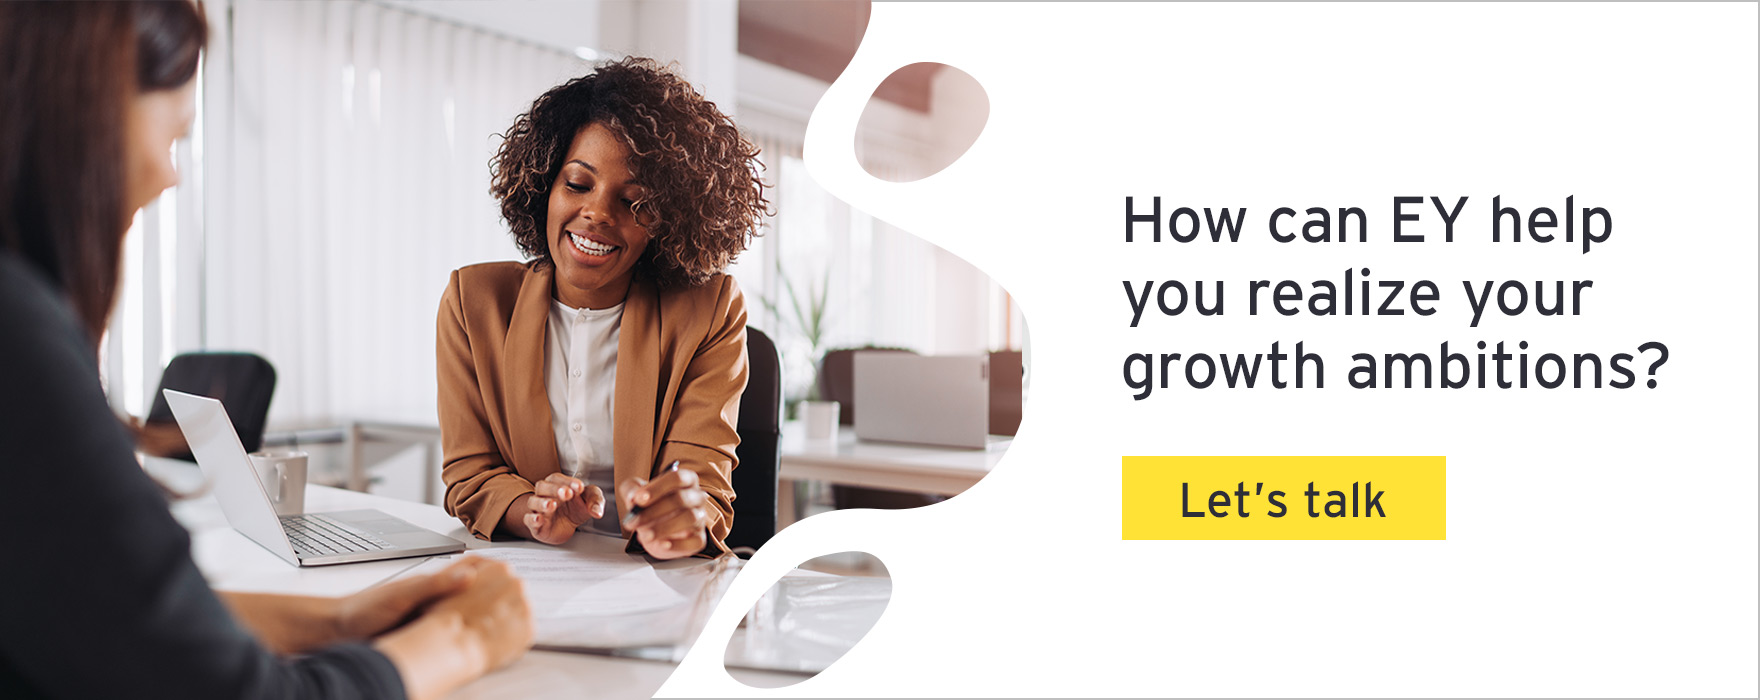 Let's talk - How can EY help you realize your growth ambitions?